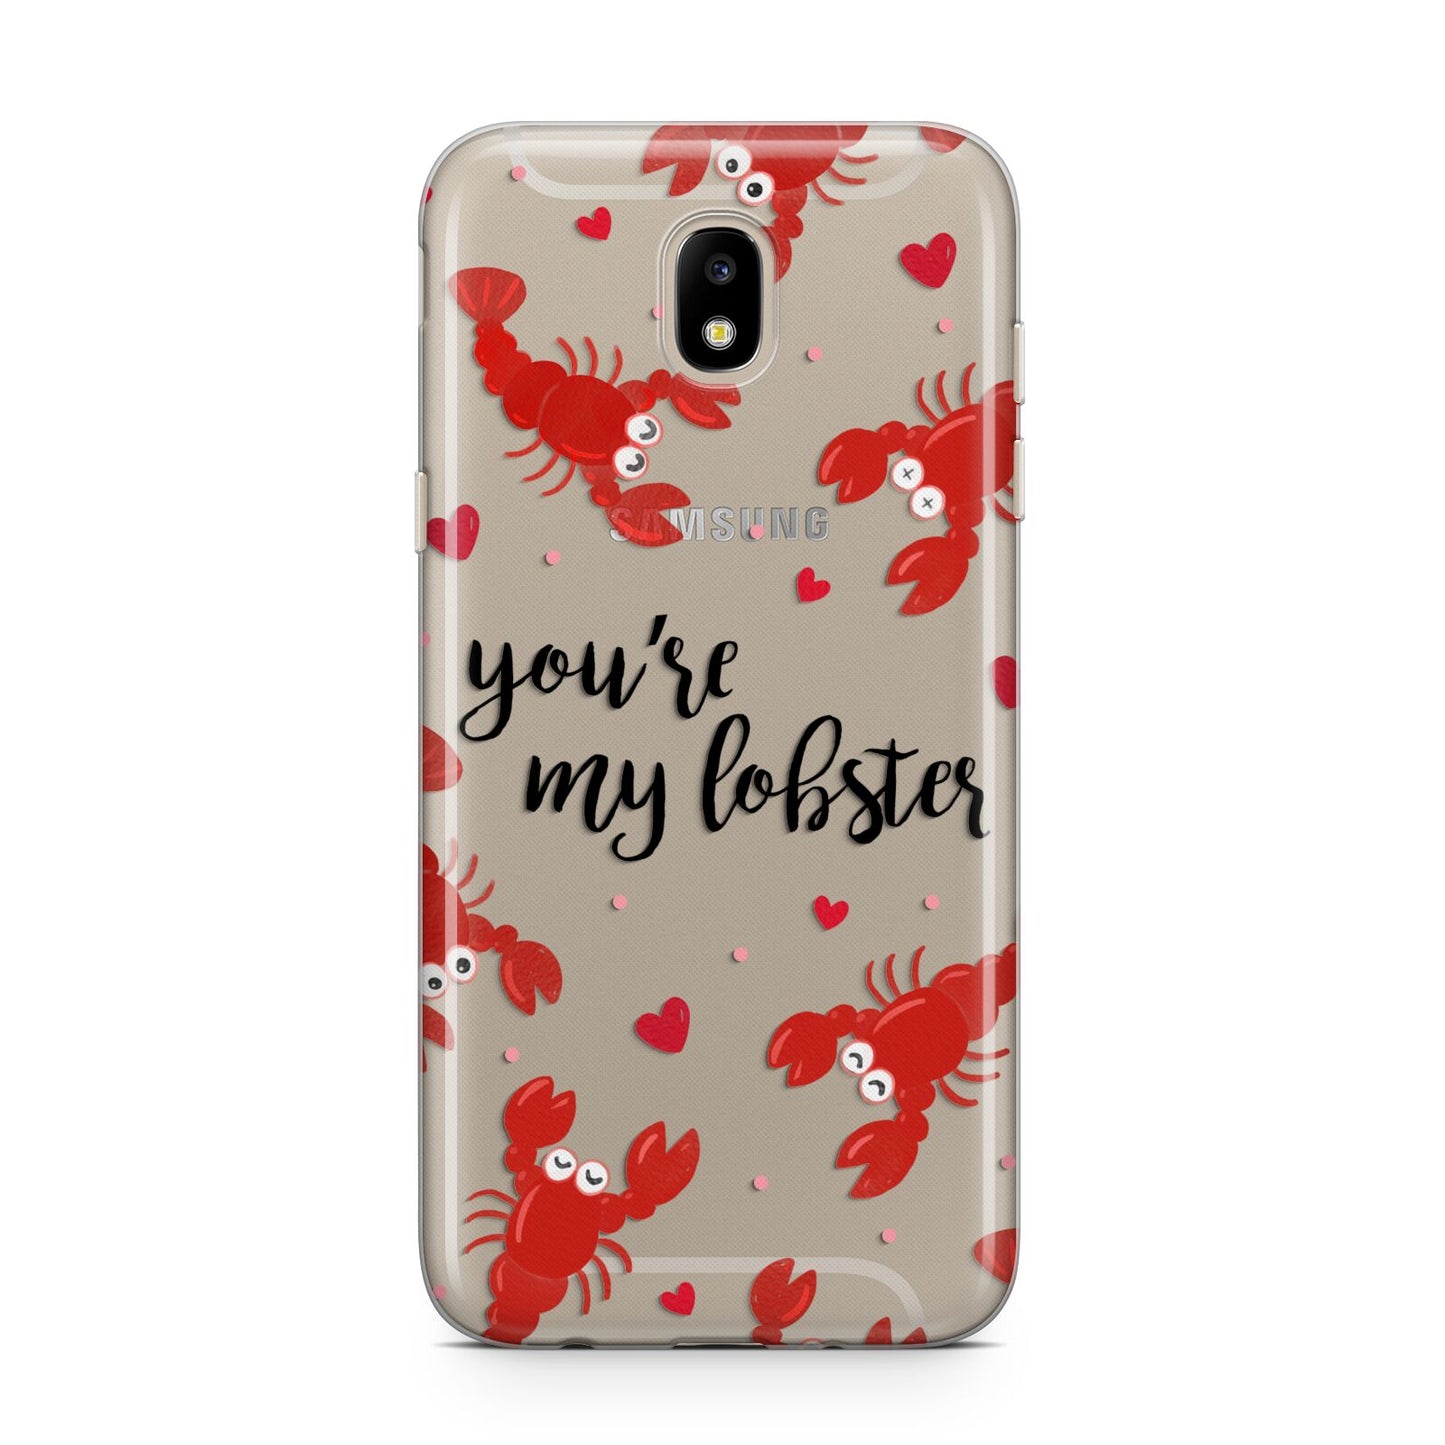 Youre My Lobster Samsung J5 2017 Case